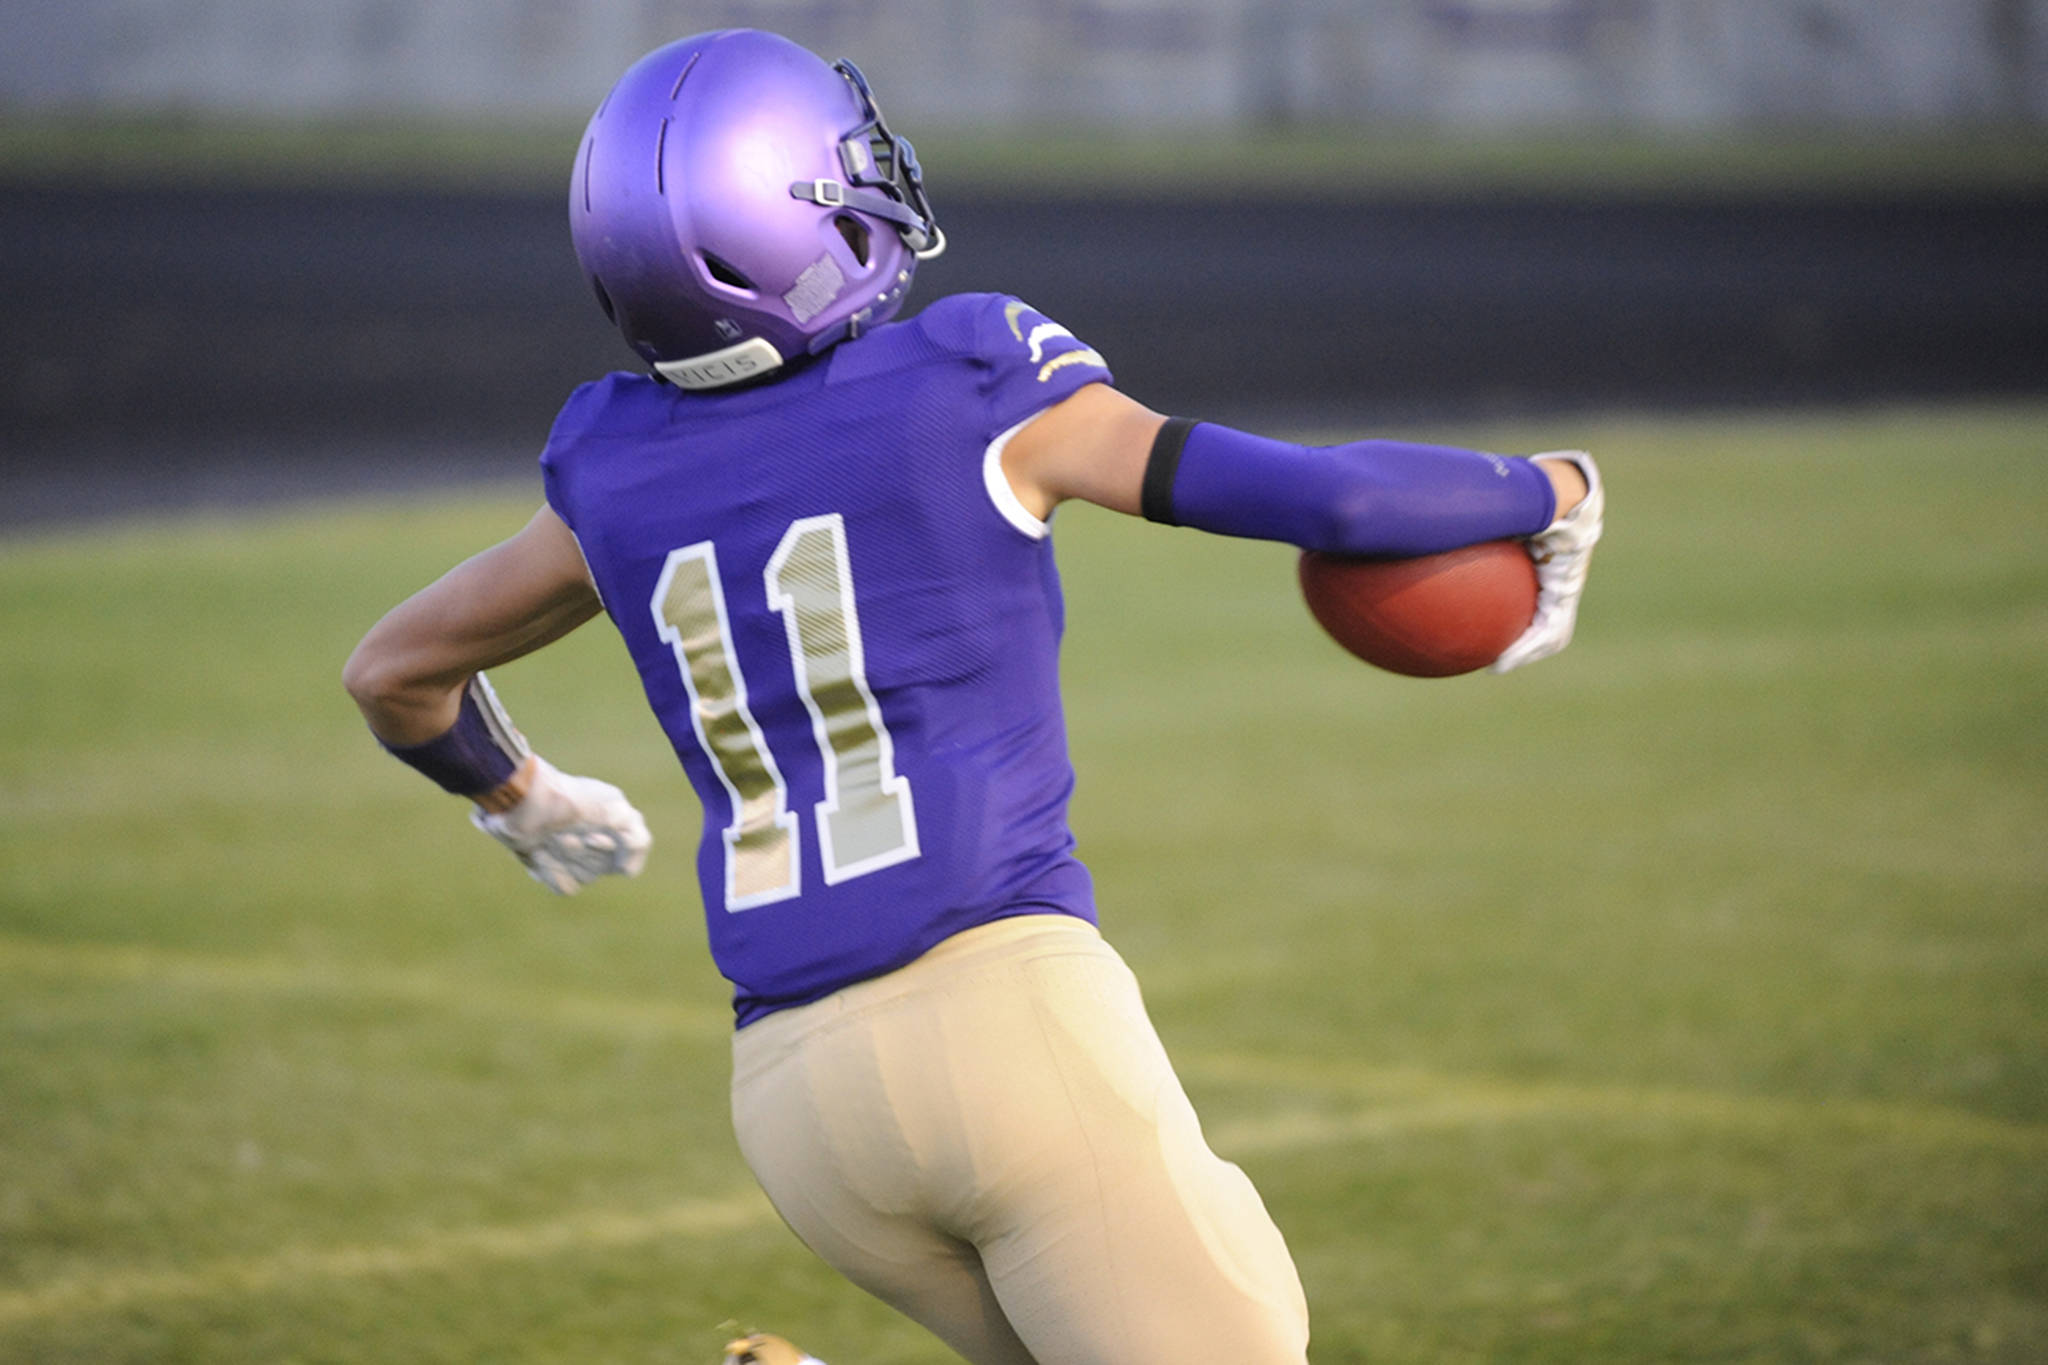 Michael Young scores a touchdown on the Sequim Wolves’ first drive against the Olympic Trojans on Oct. 11. Young would total 23 receptions for 432 yards and six touchdowns on the season and played shutdown defense as a cornerback to help earn first team All Olympic League honors on offense and defense. Sequim Gazette file photo by Conor Dowley